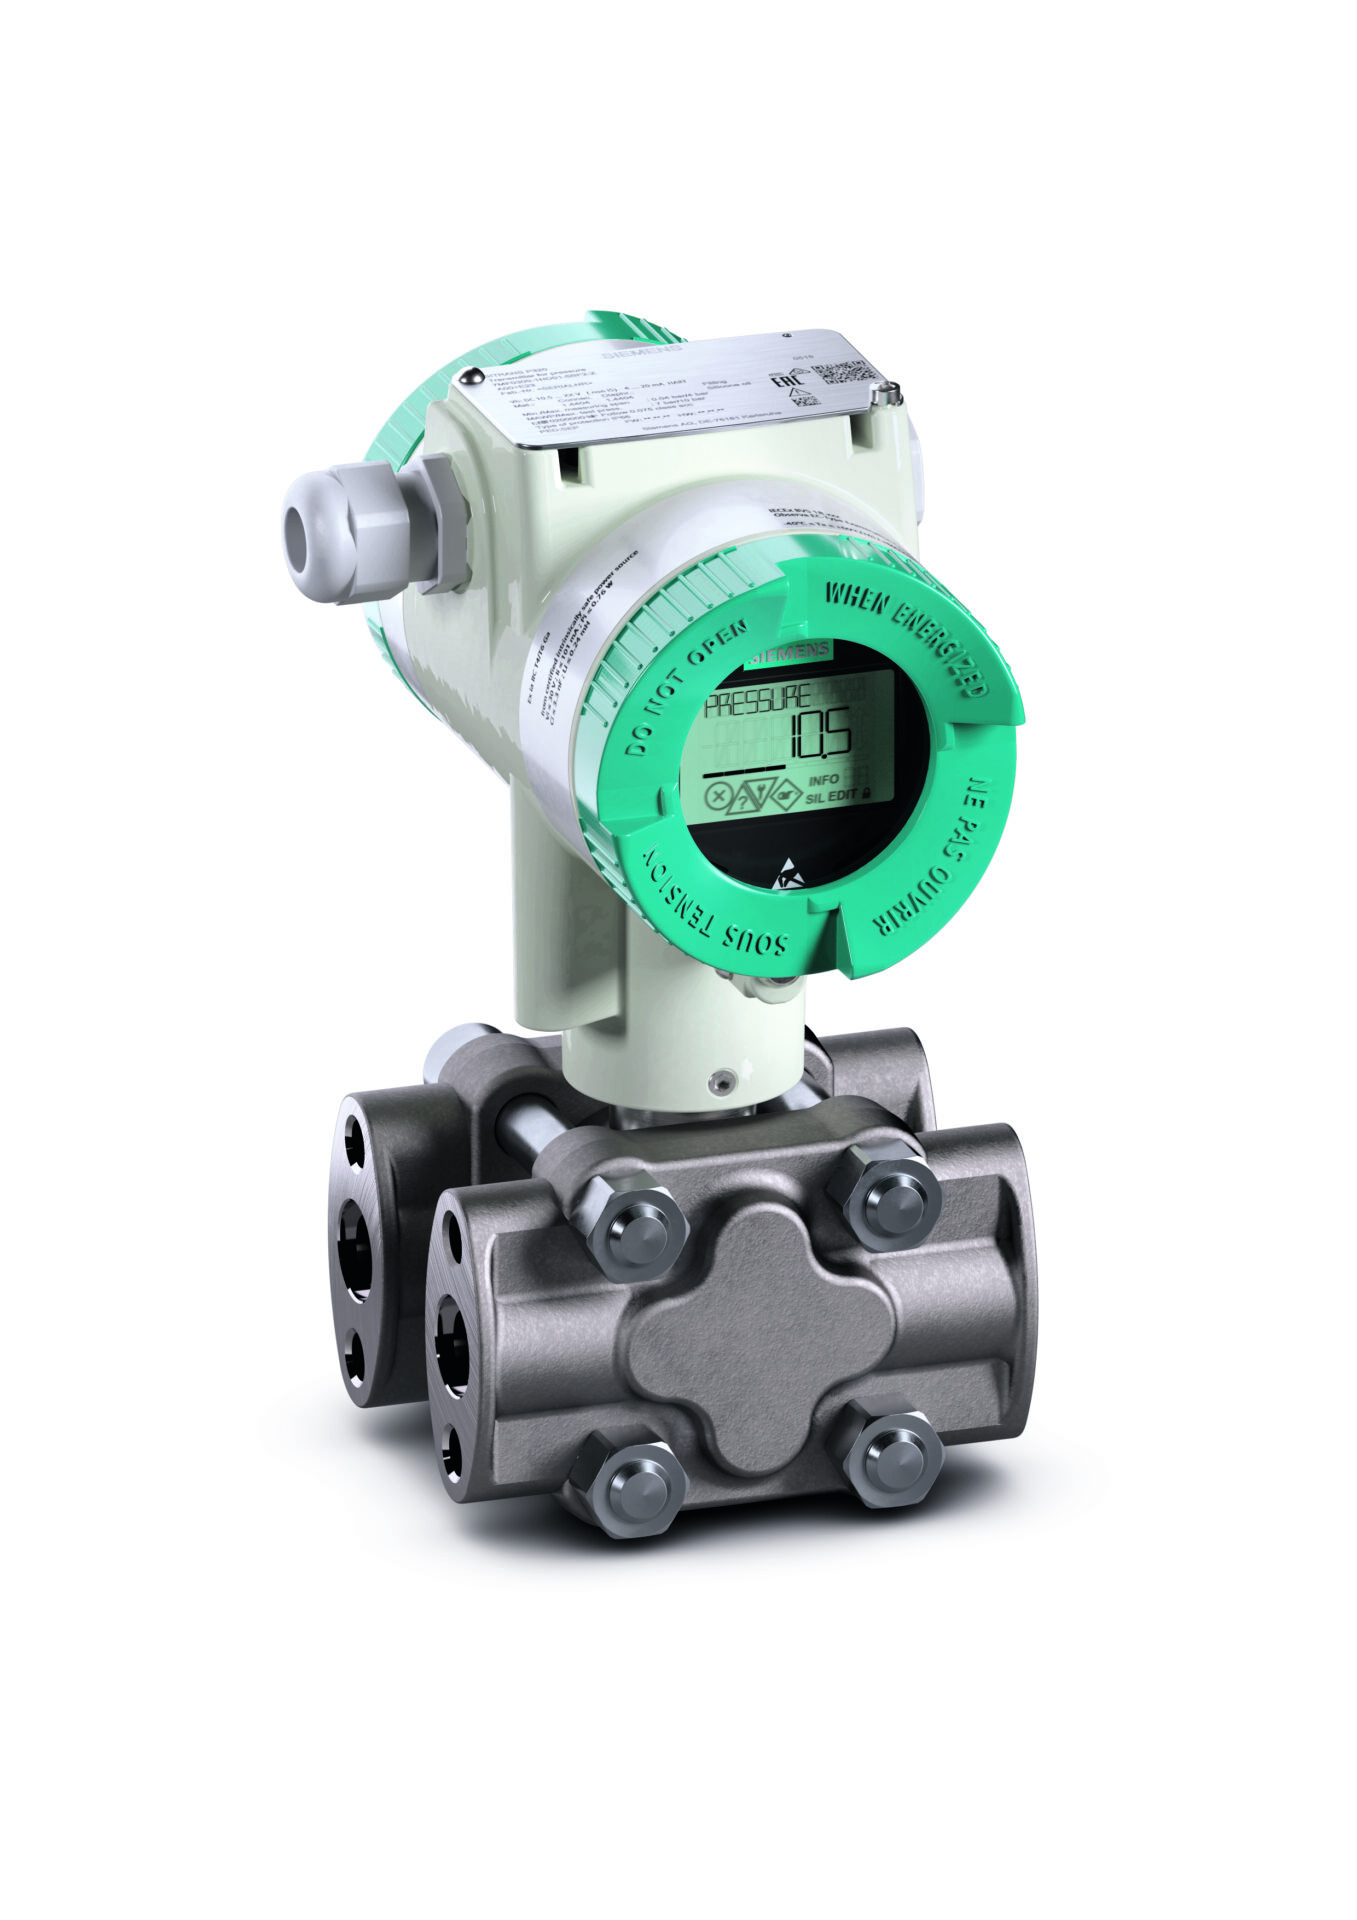 Pressure Transmitters Provide Reliable Performance on Filtration Systems For Hazardous Airborne Chemicals